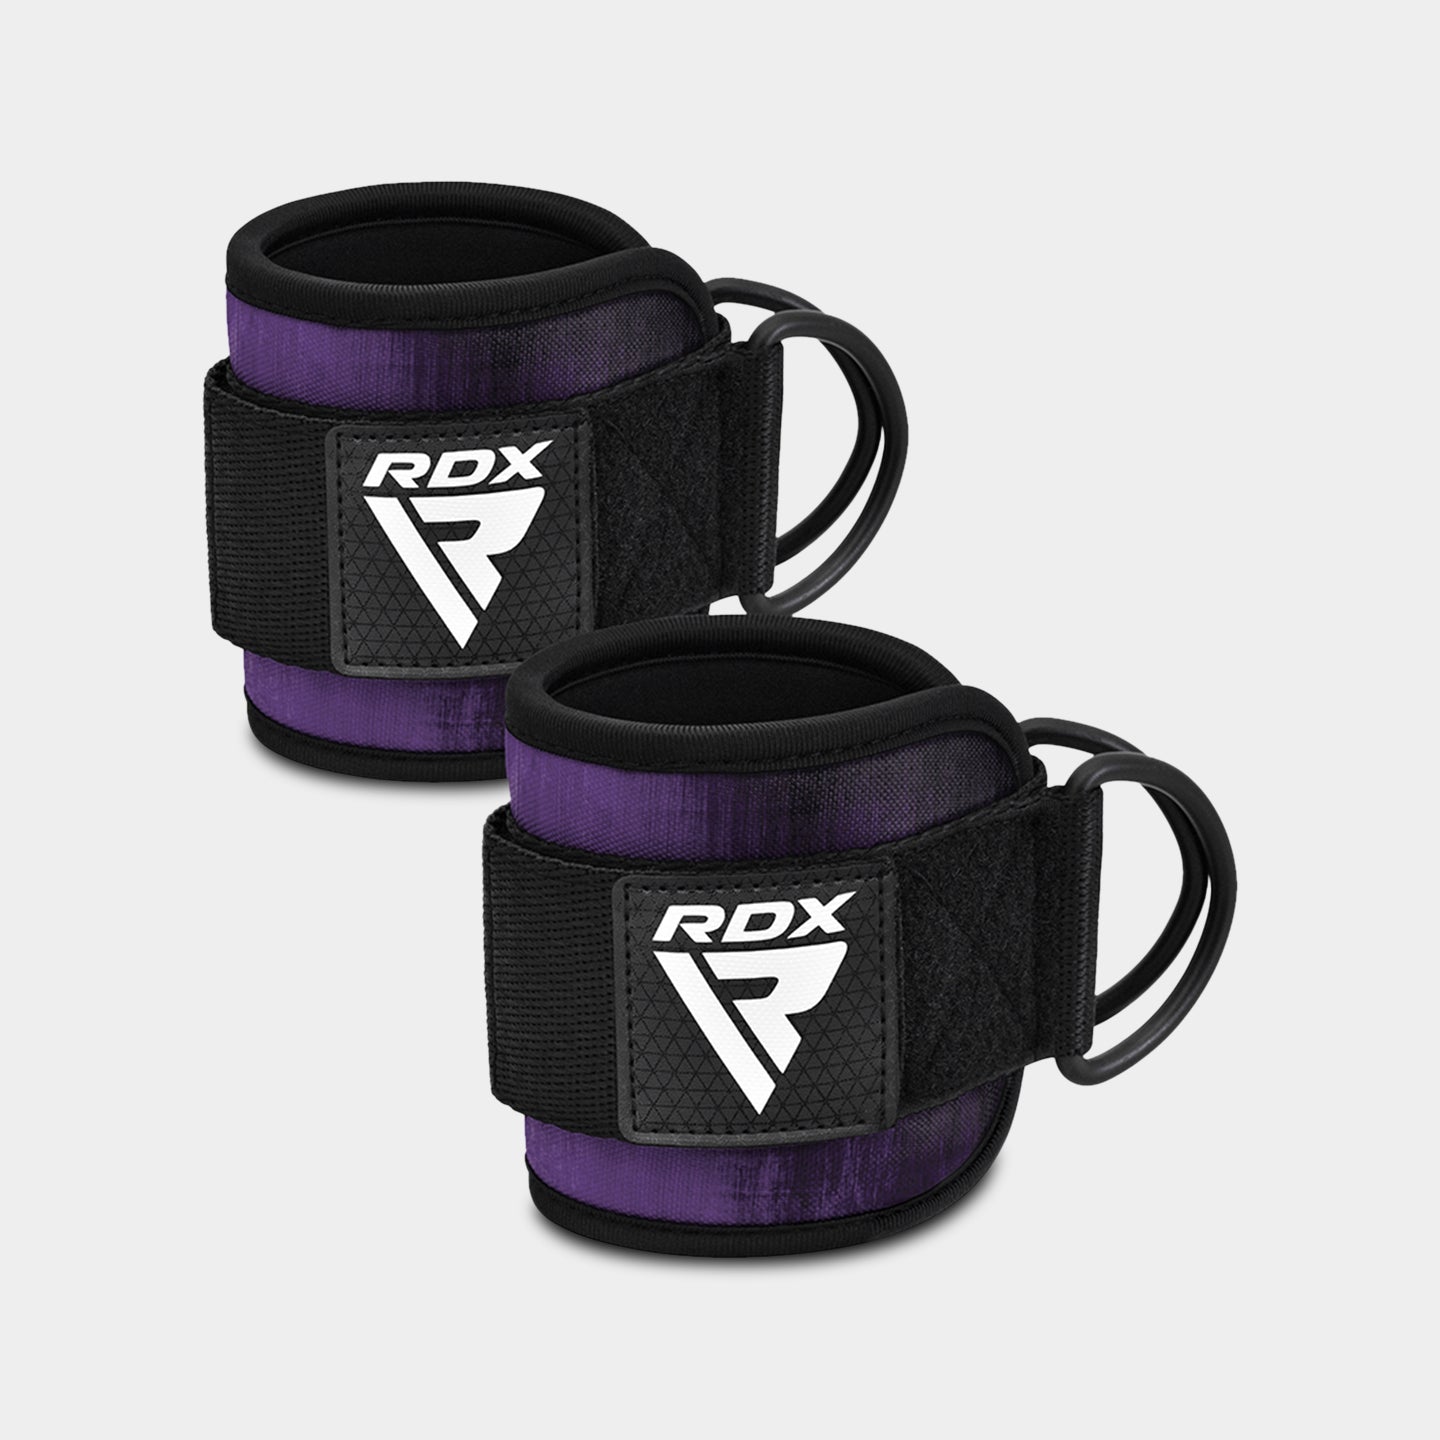 RDX Sports A4 Ankle Straps For Gym Cable Machine, Standard Size, Purple A1